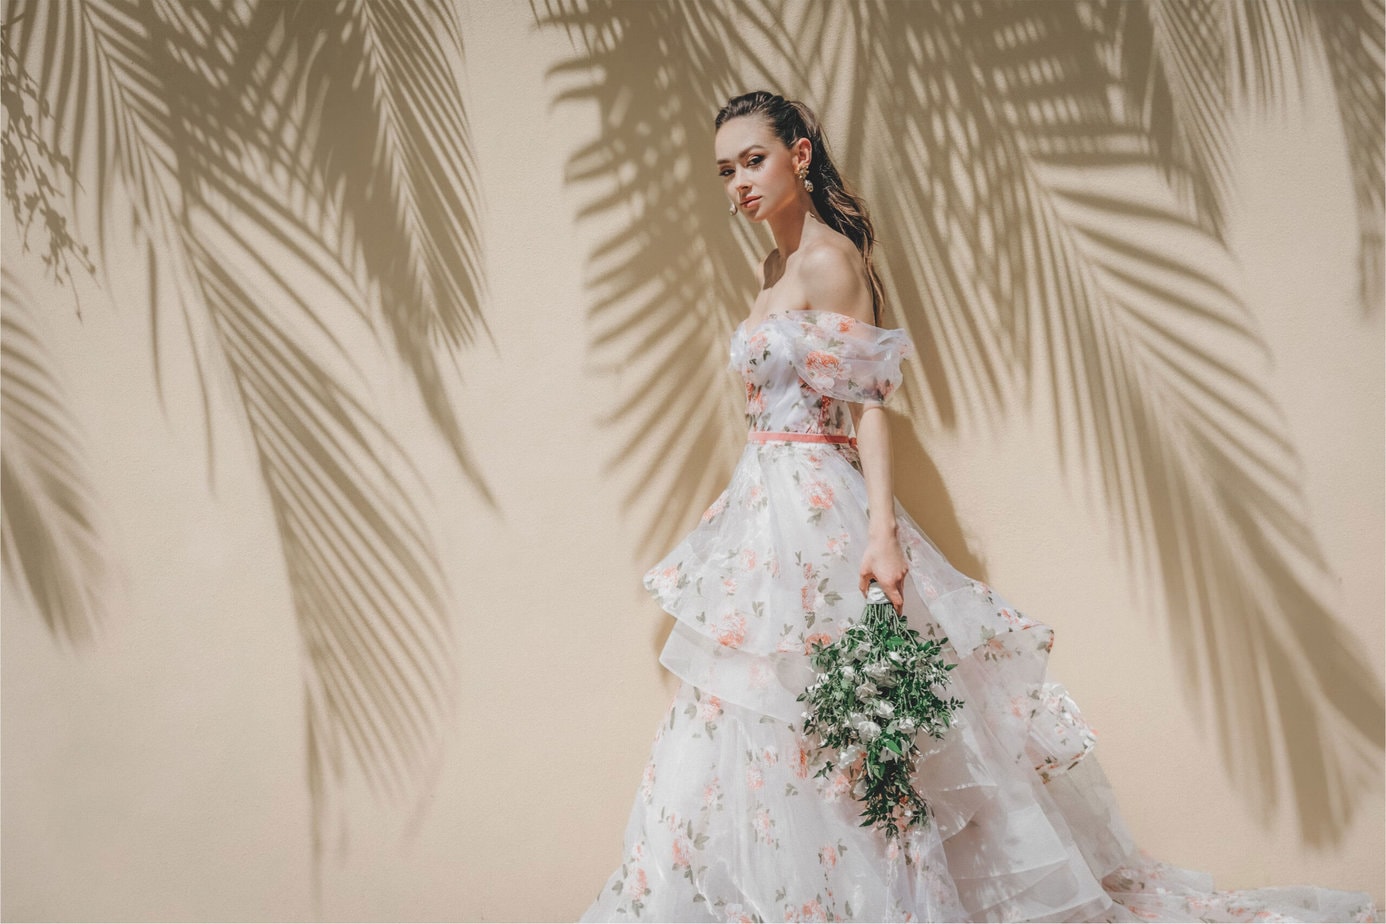 The Best Rainbow Wedding Dress Looks for Every Style